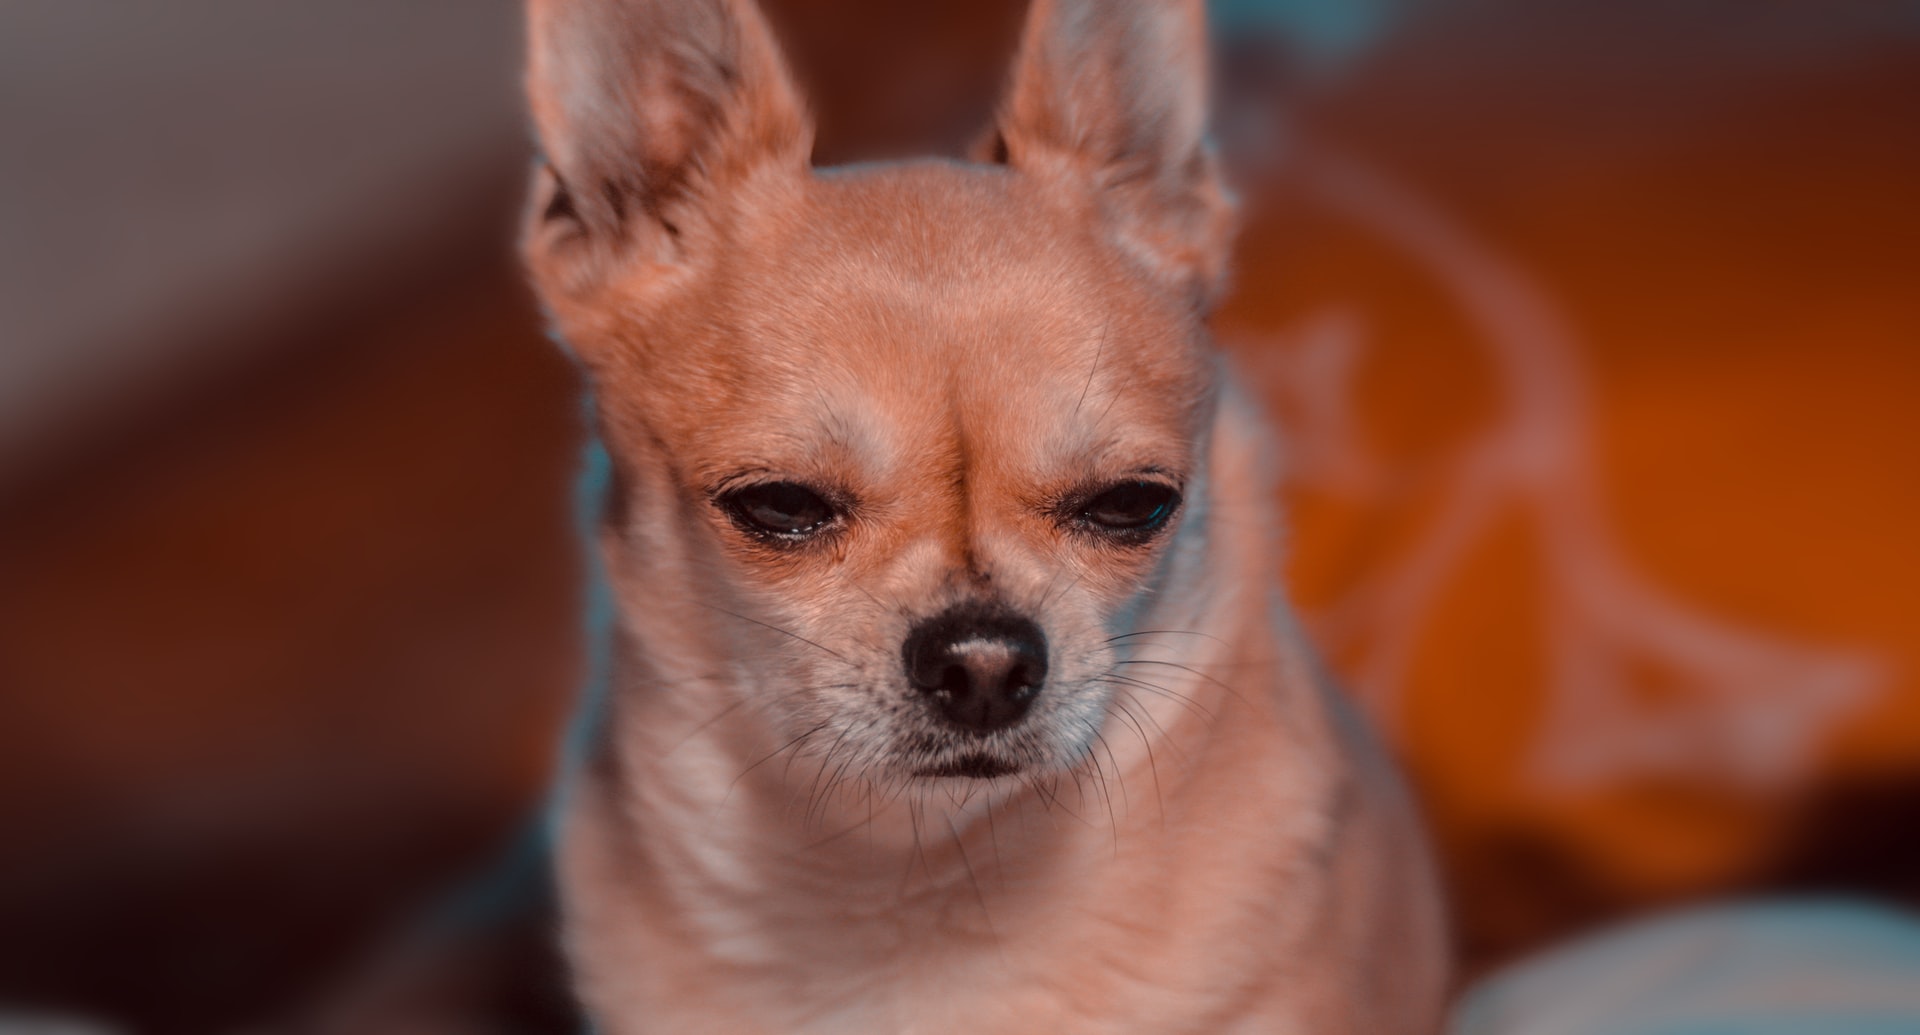 Other Causes of Chihuahua Always Angry